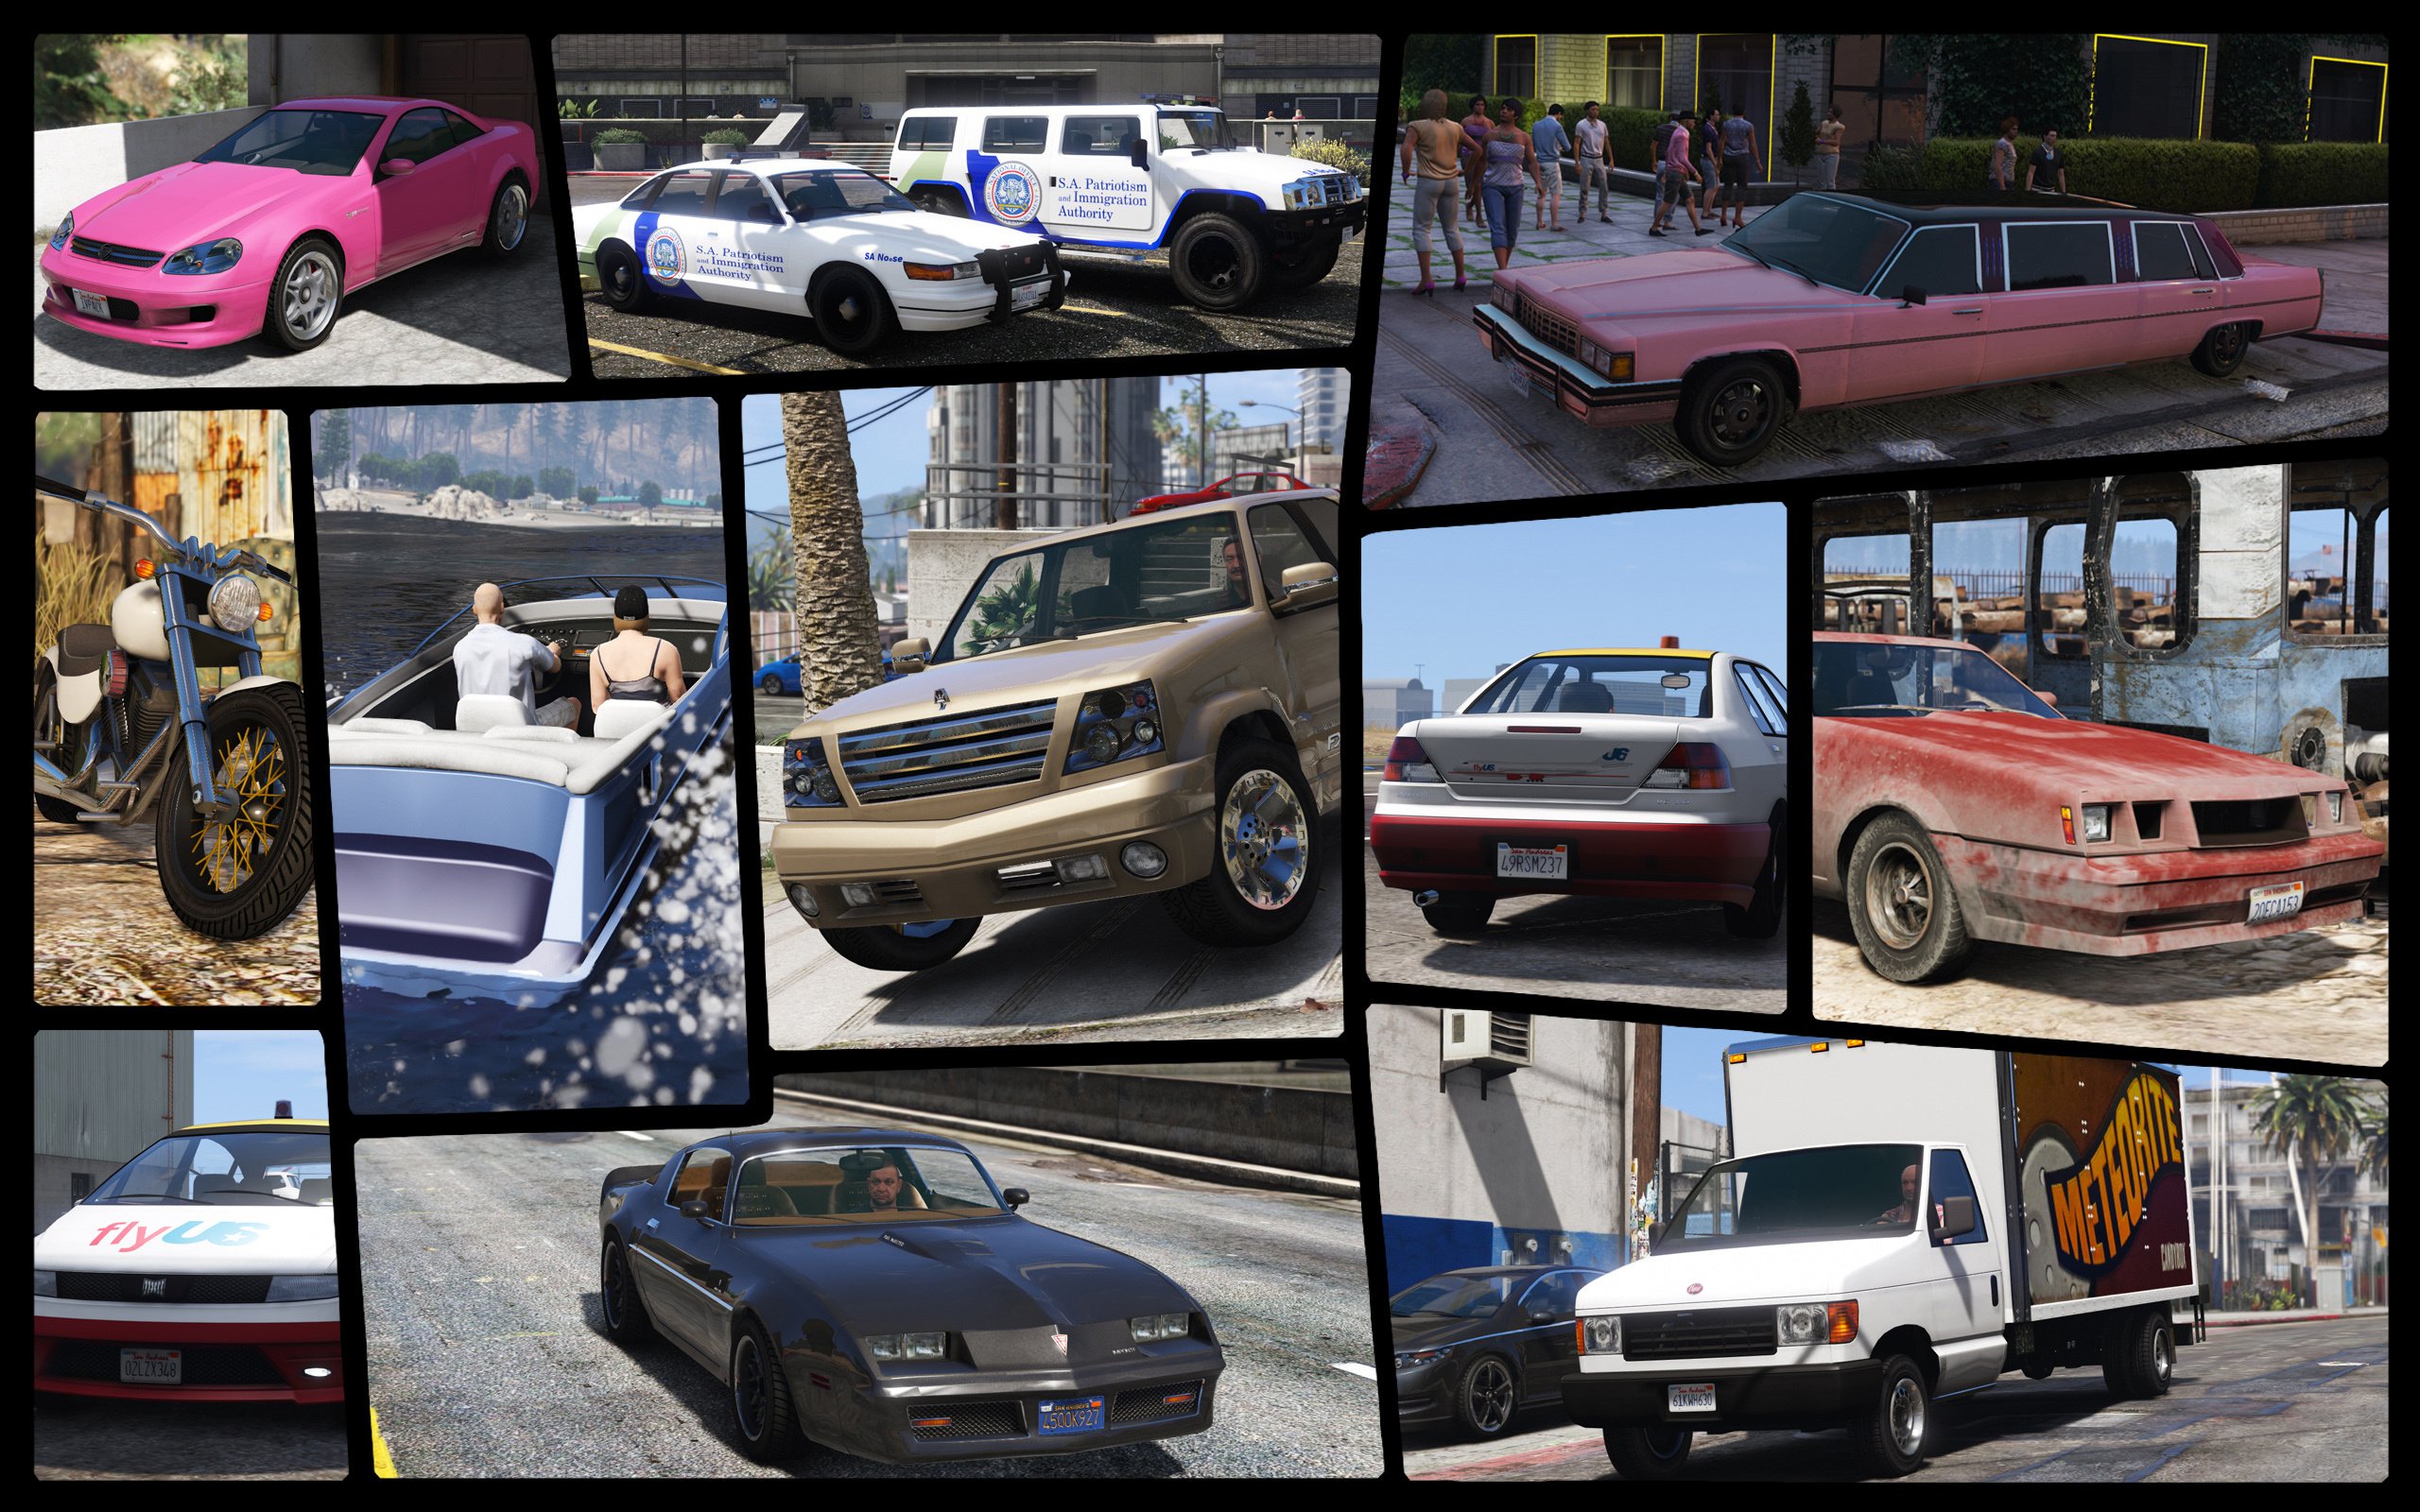 Image 4 - GTA IV realistic car pack standalone mod for Grand Theft